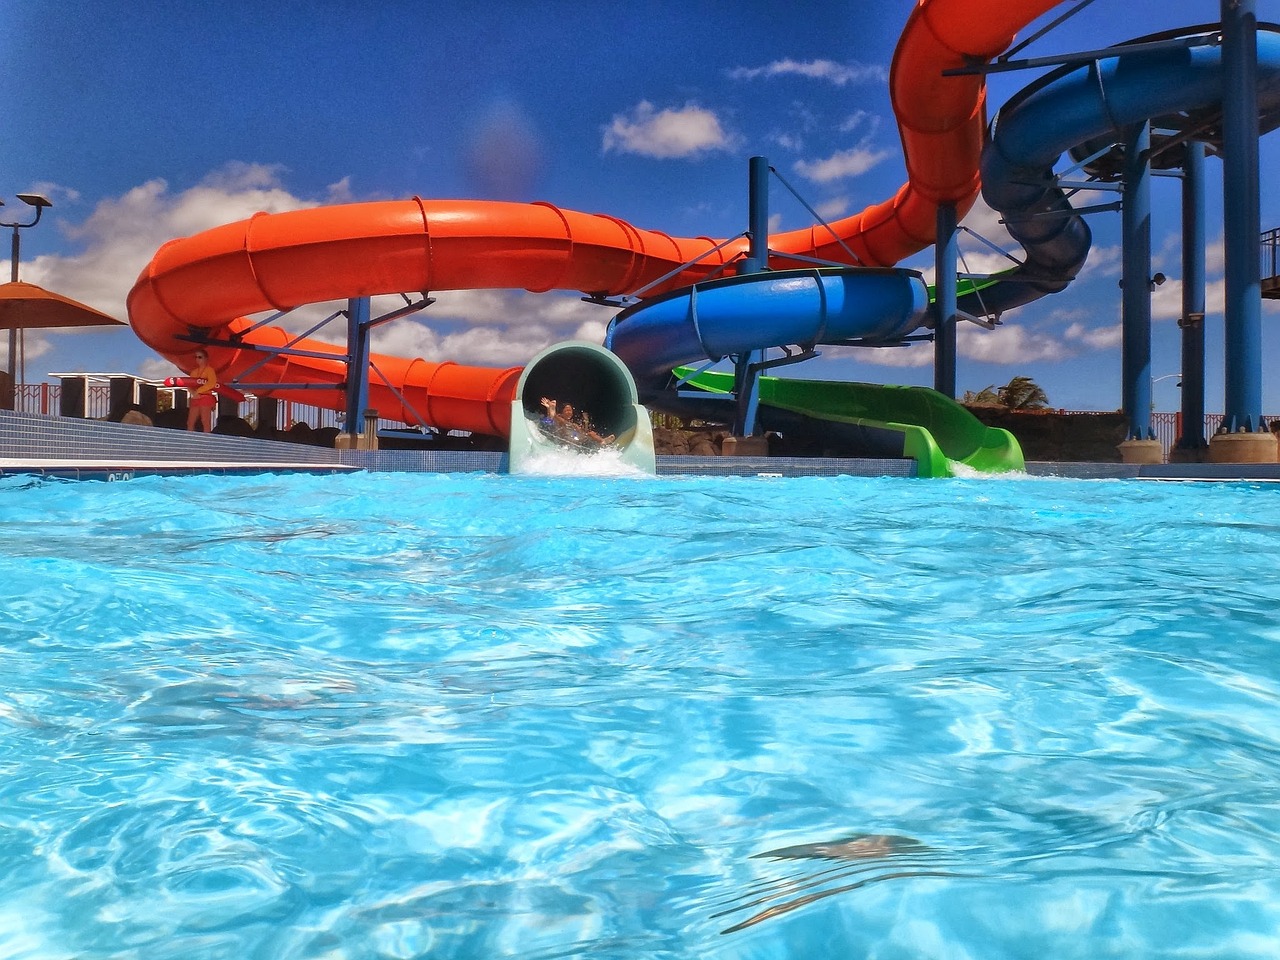 Top 20 Longest Waterslides Of All Time